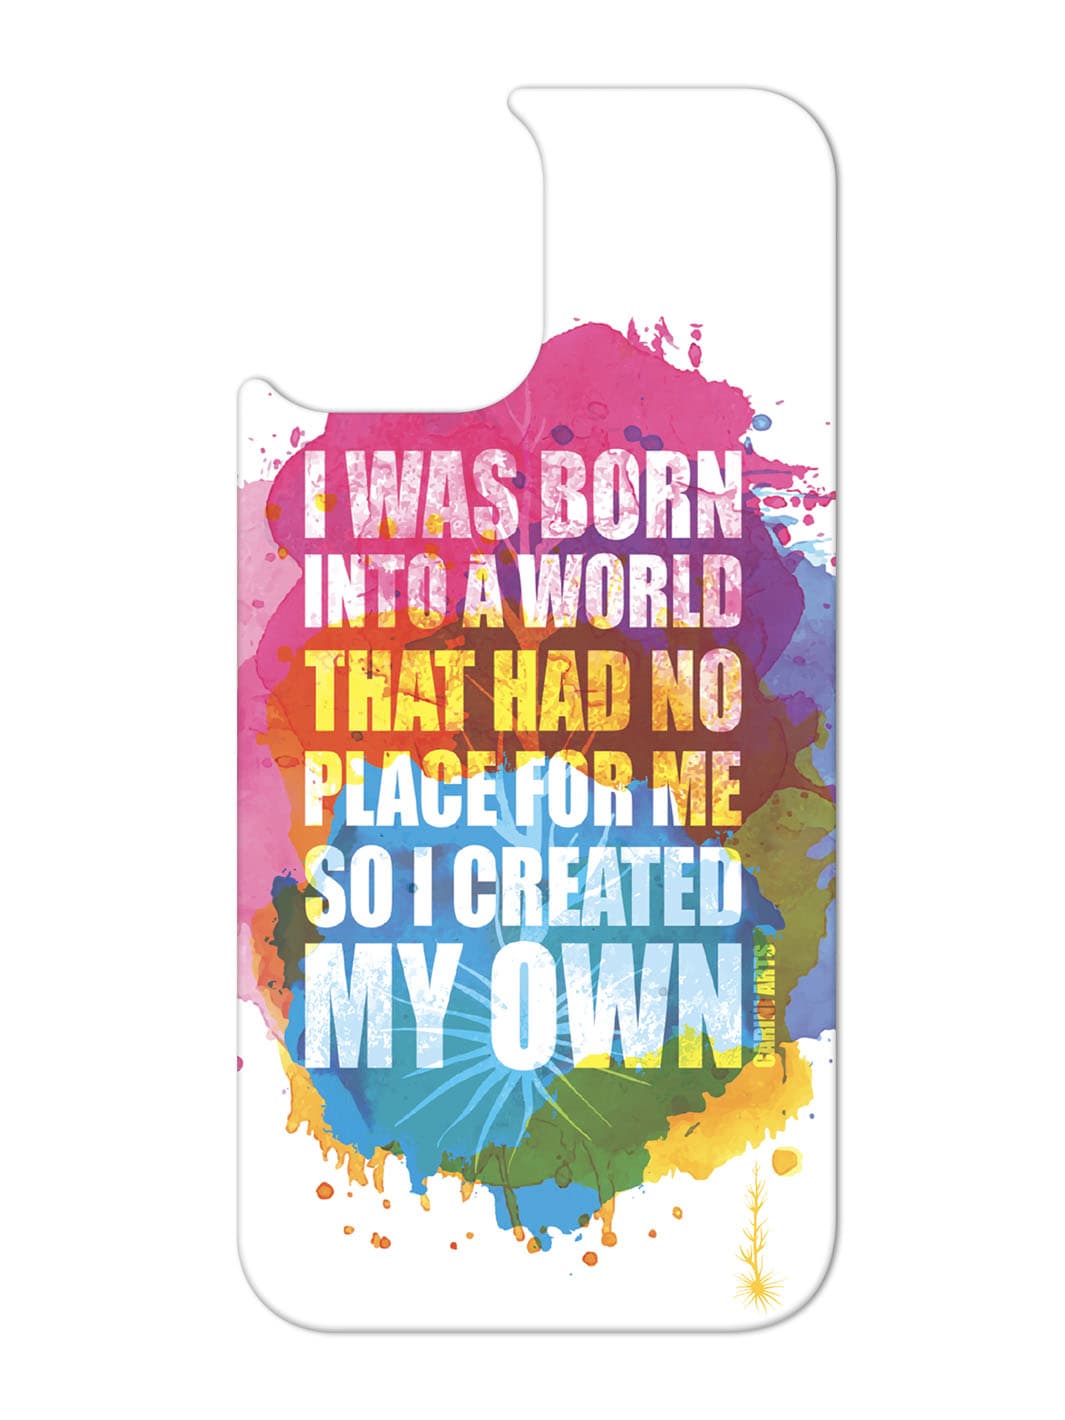 Phone Case Set - Gave You Every Piece Of Me